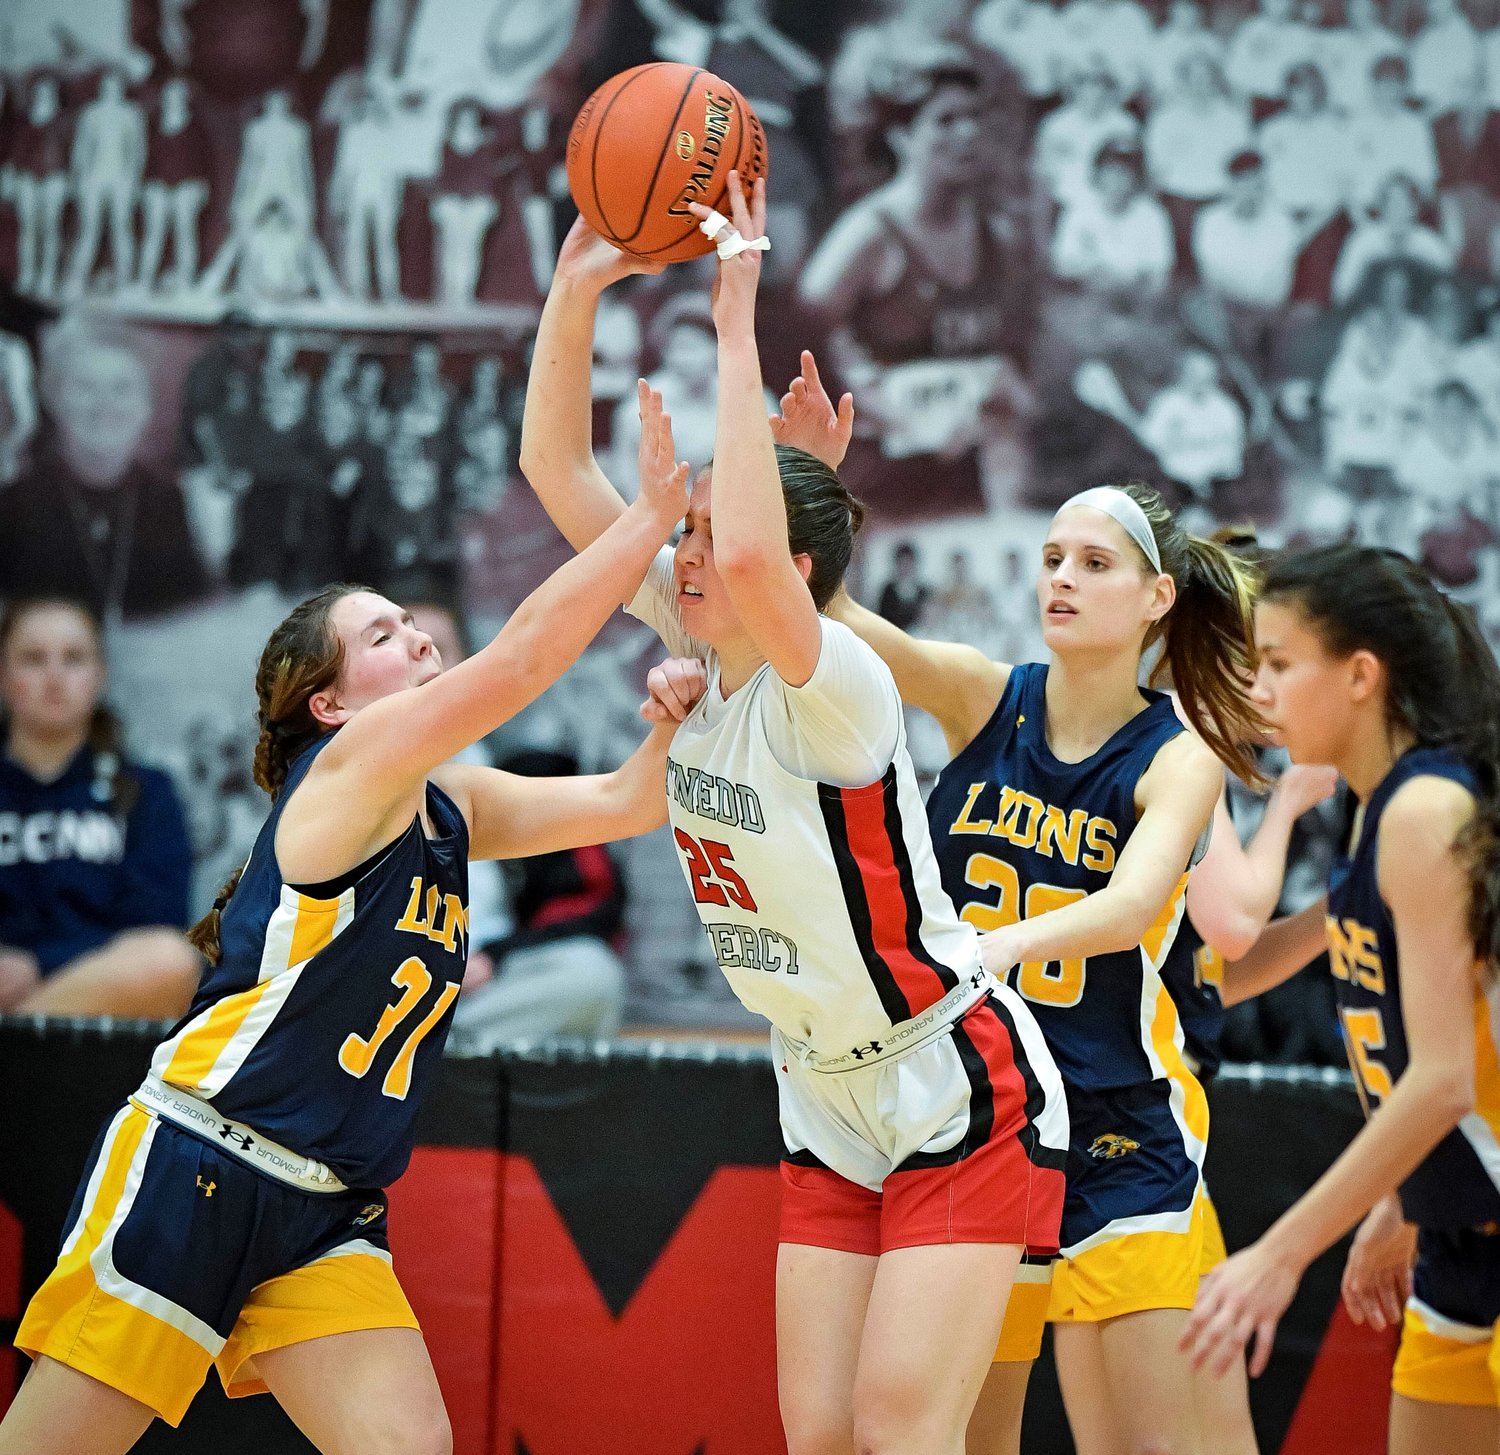 Gwynedd Mercy’s Dylan Burke gets double teamed by New Hope’s Emily Wilson and Emma Ives.